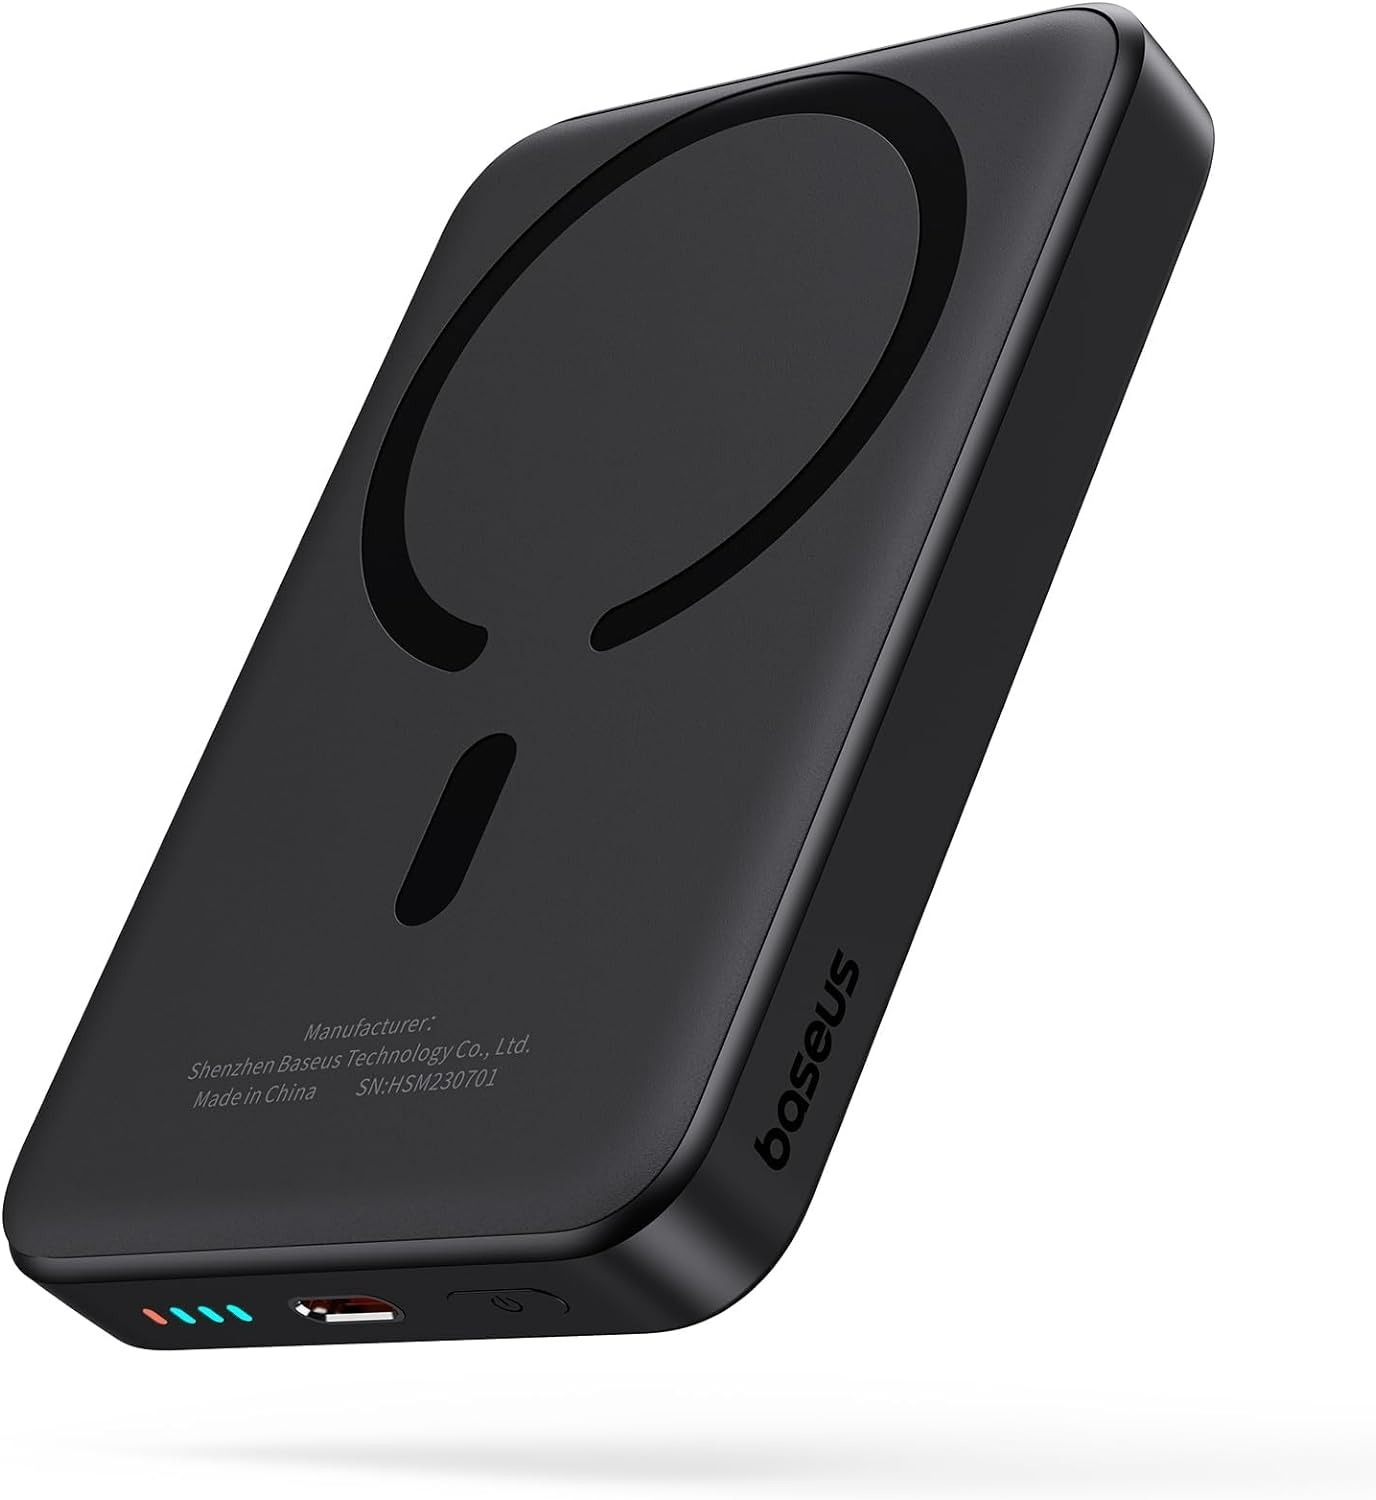 Baseus 10000mAh Wireless Magnetic Power Bank w/ Type-C Cable $22.79 + Free Shipping w/ Prime or orders $35+